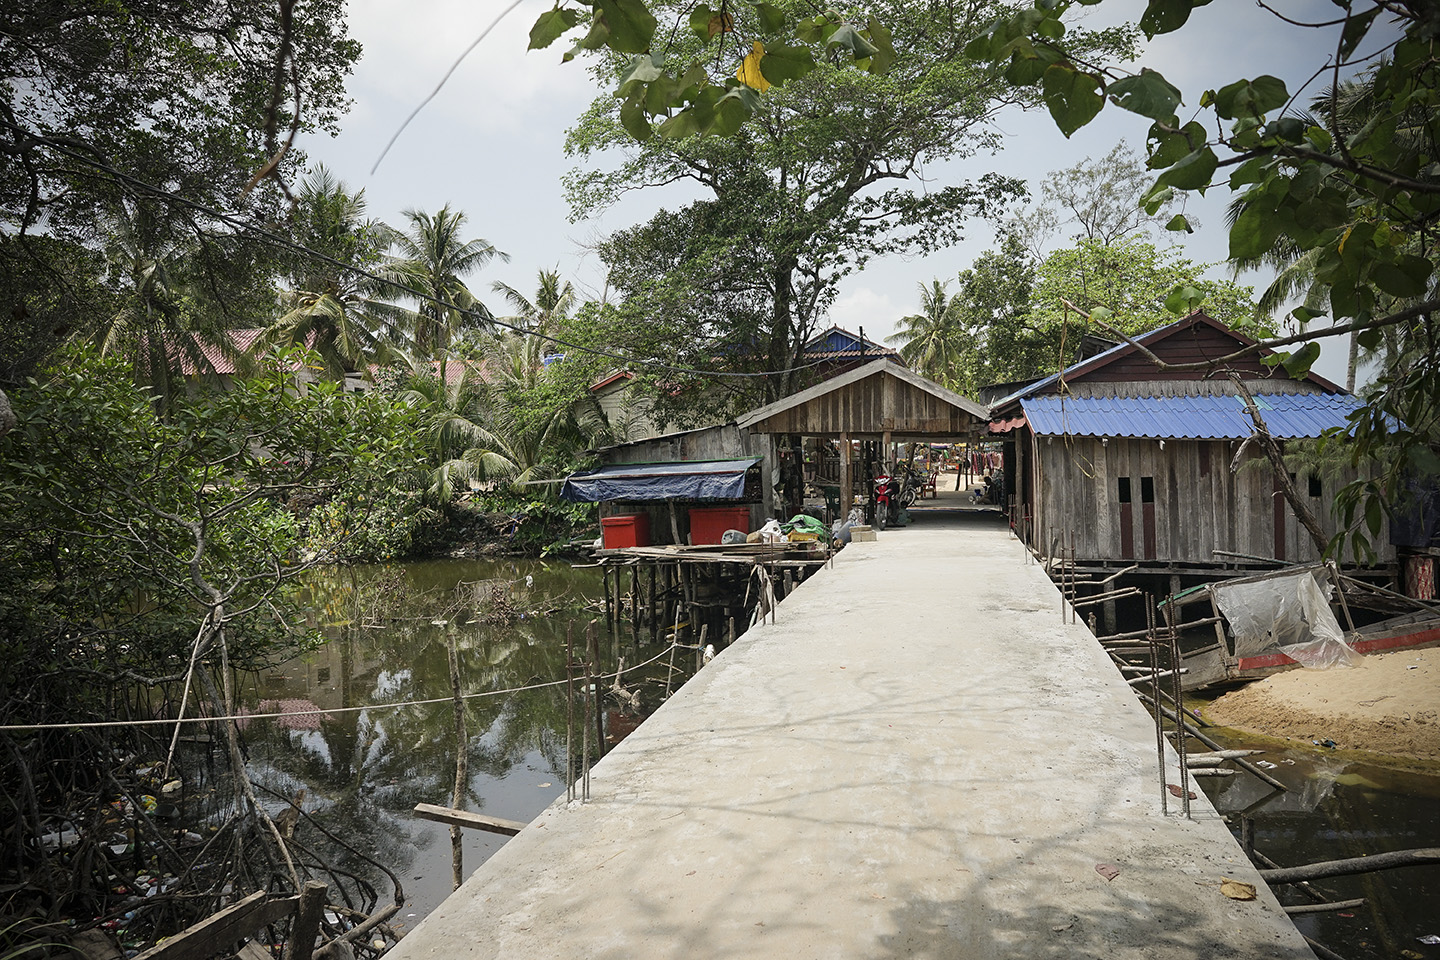 Entrance to the fishing village